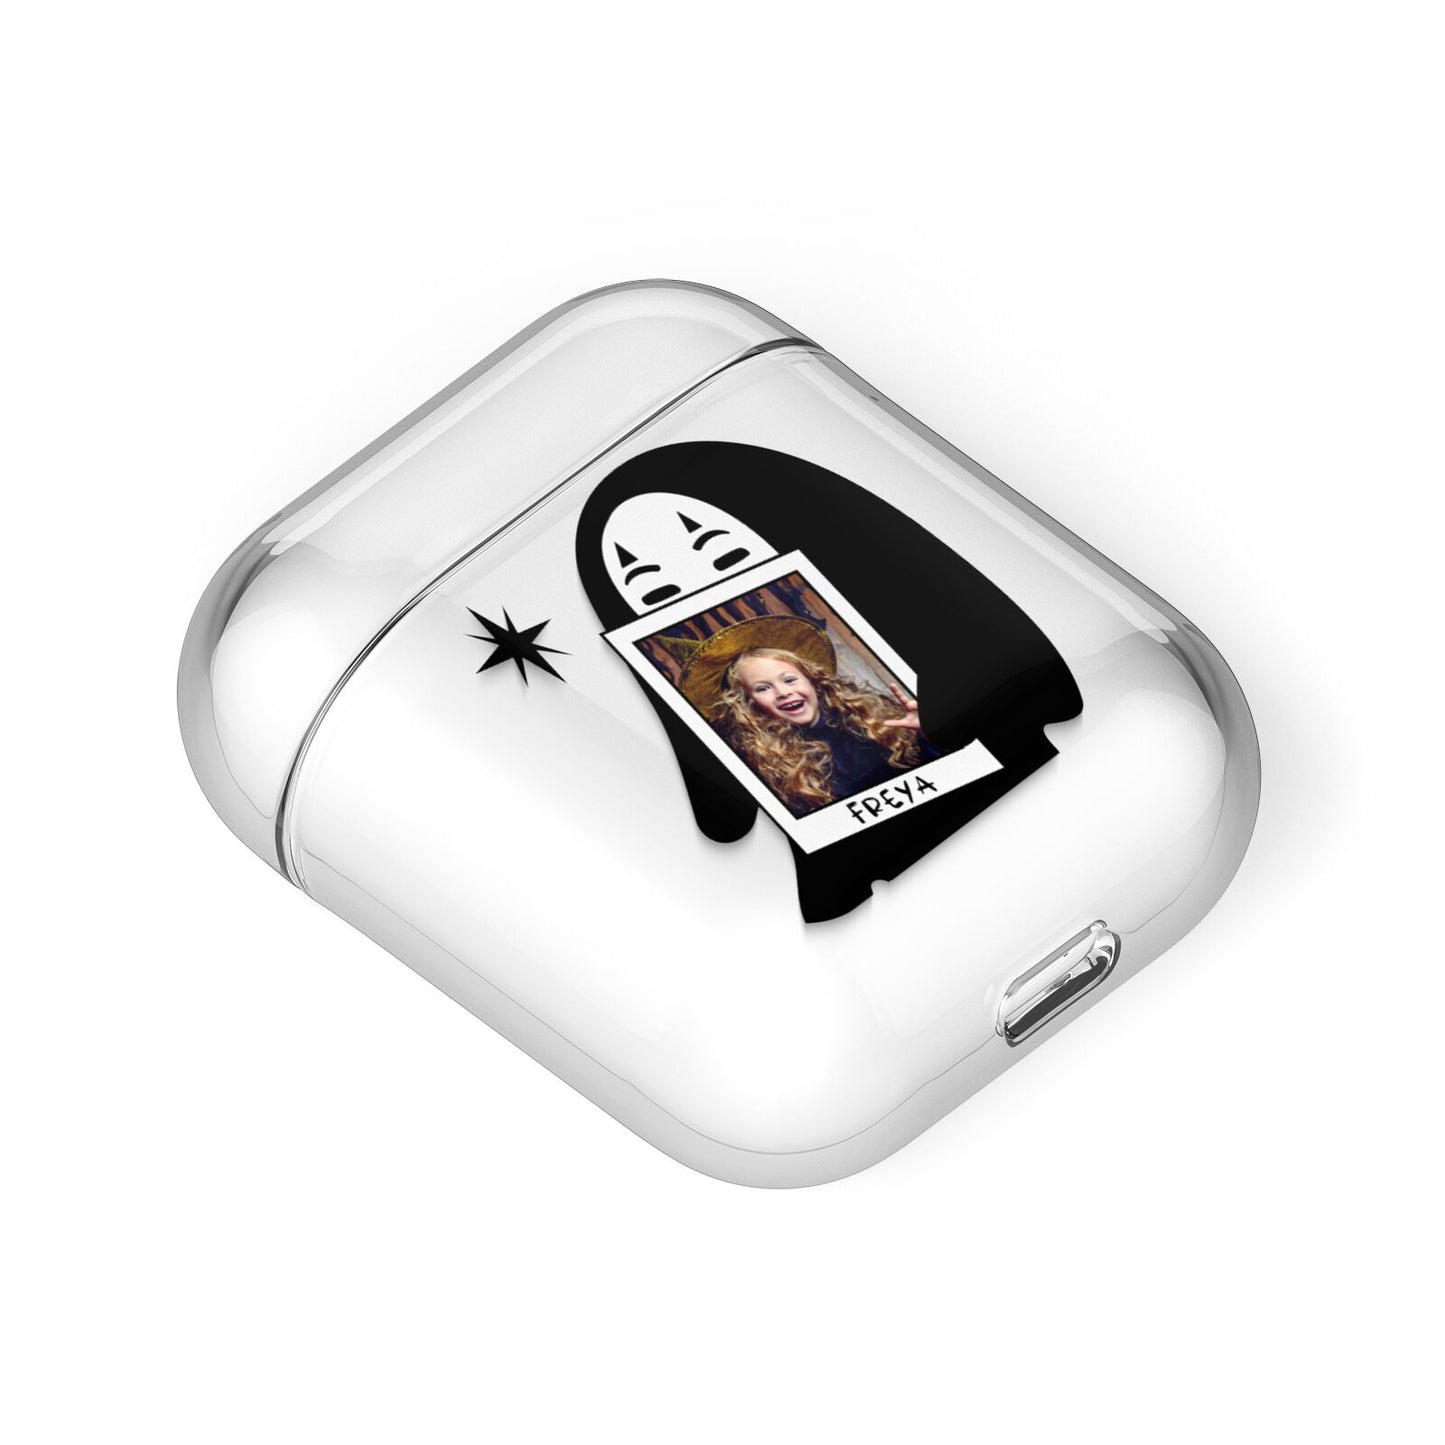 Ghostly Halloween Photo AirPods Case Laid Flat